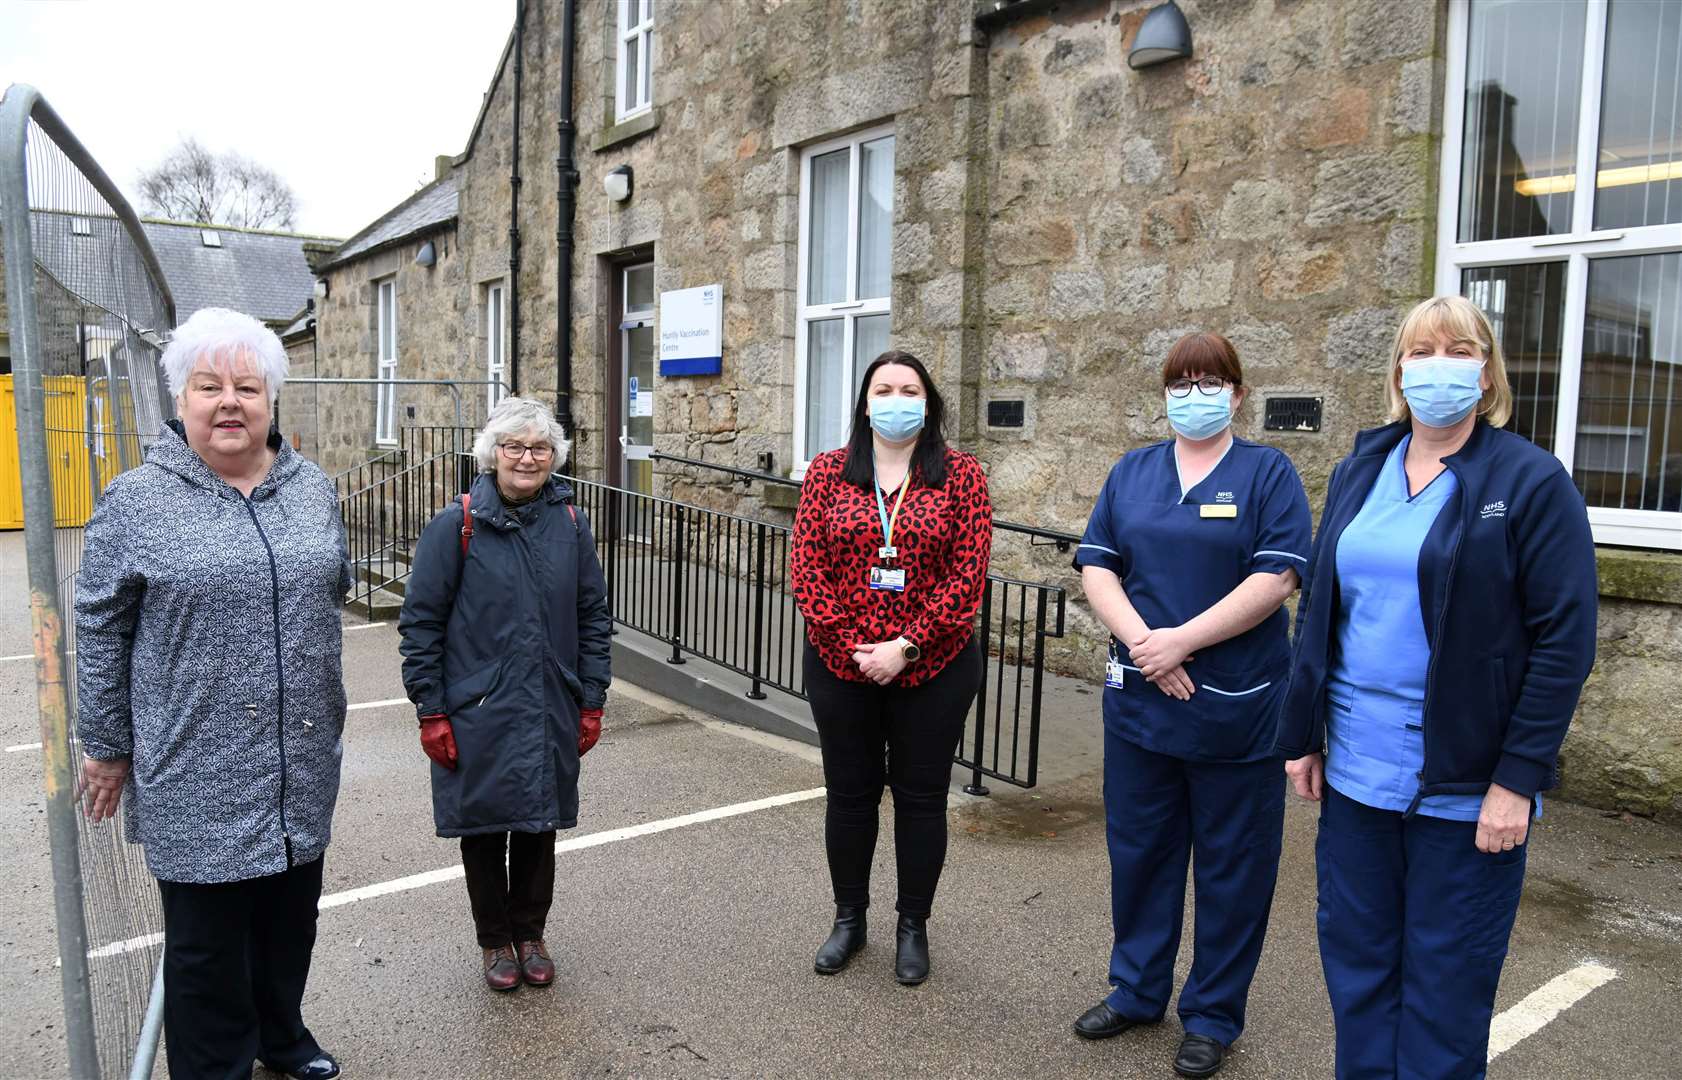 Staff members and Friends of Jubilee outside the new vaccination centre in Huntly. Picture: Becky Saunderson.